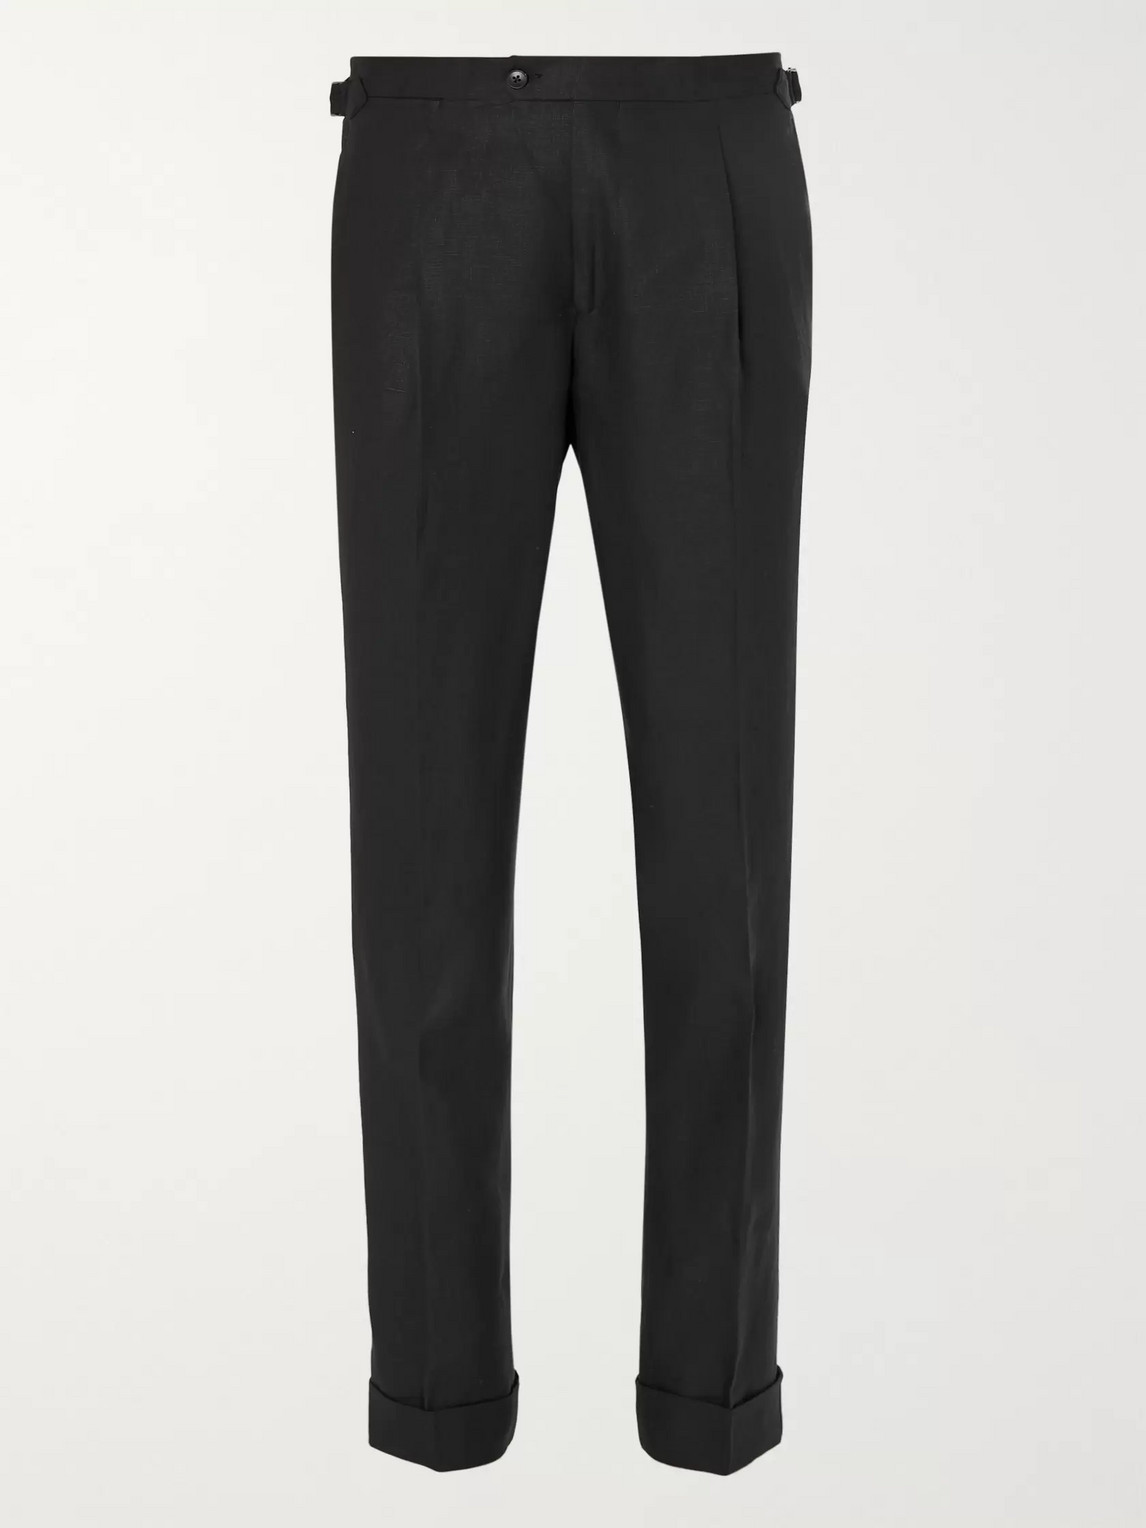 Saman Amel Black Tapered Pleated Linen Suit Trousers